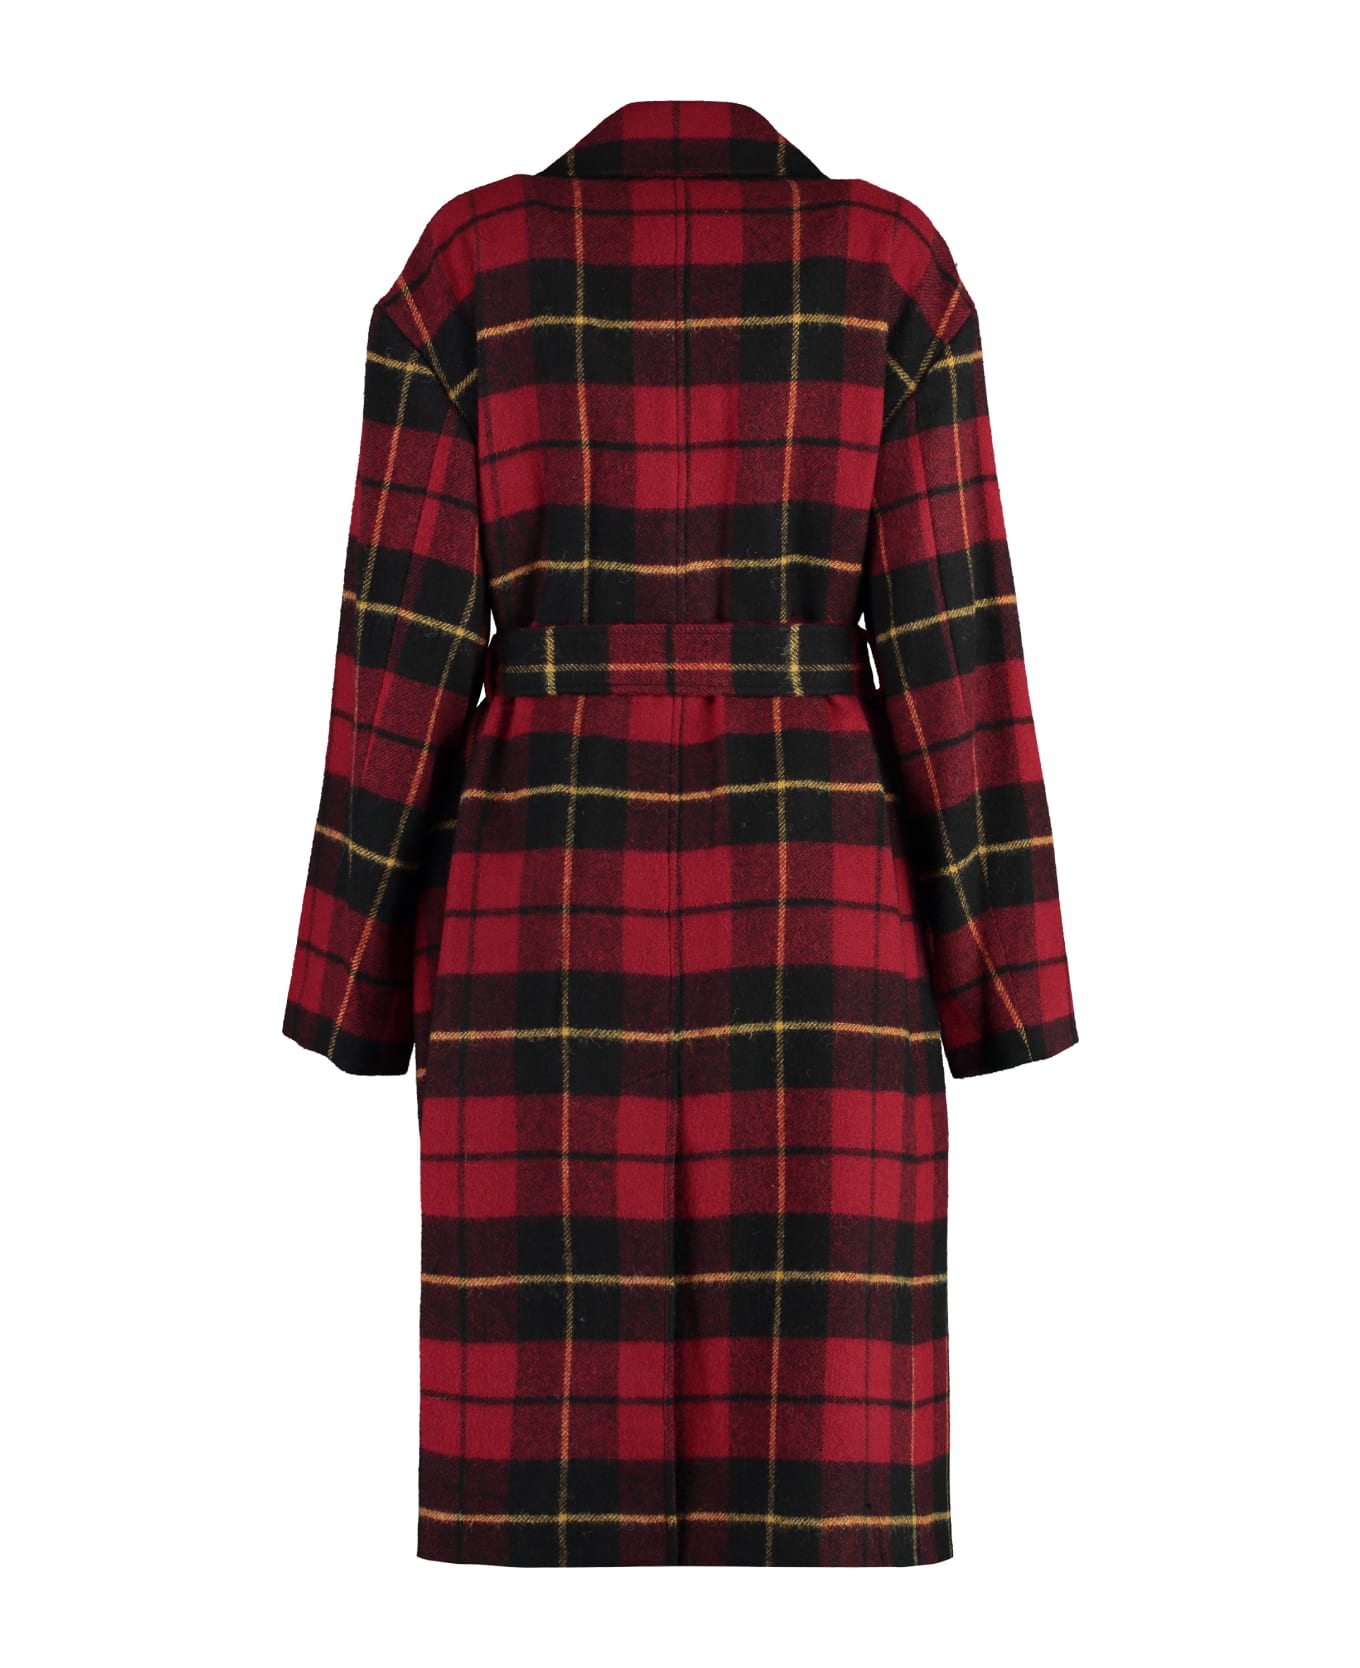 Polo Ralph Lauren Checked Wool Coat - red